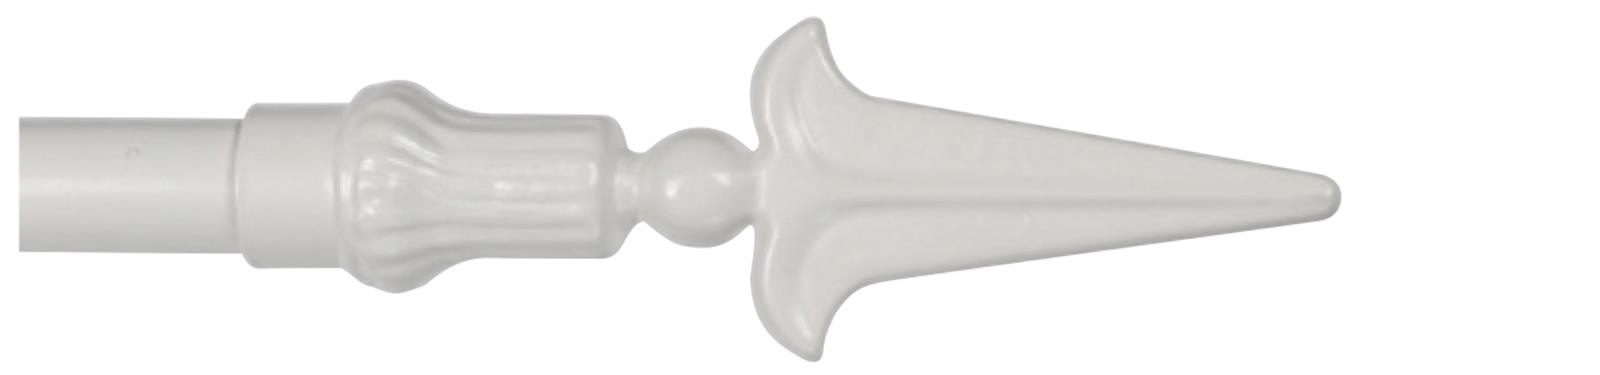 Cameron Fuller 32mm Metal Curtain Pole Oyster Spear